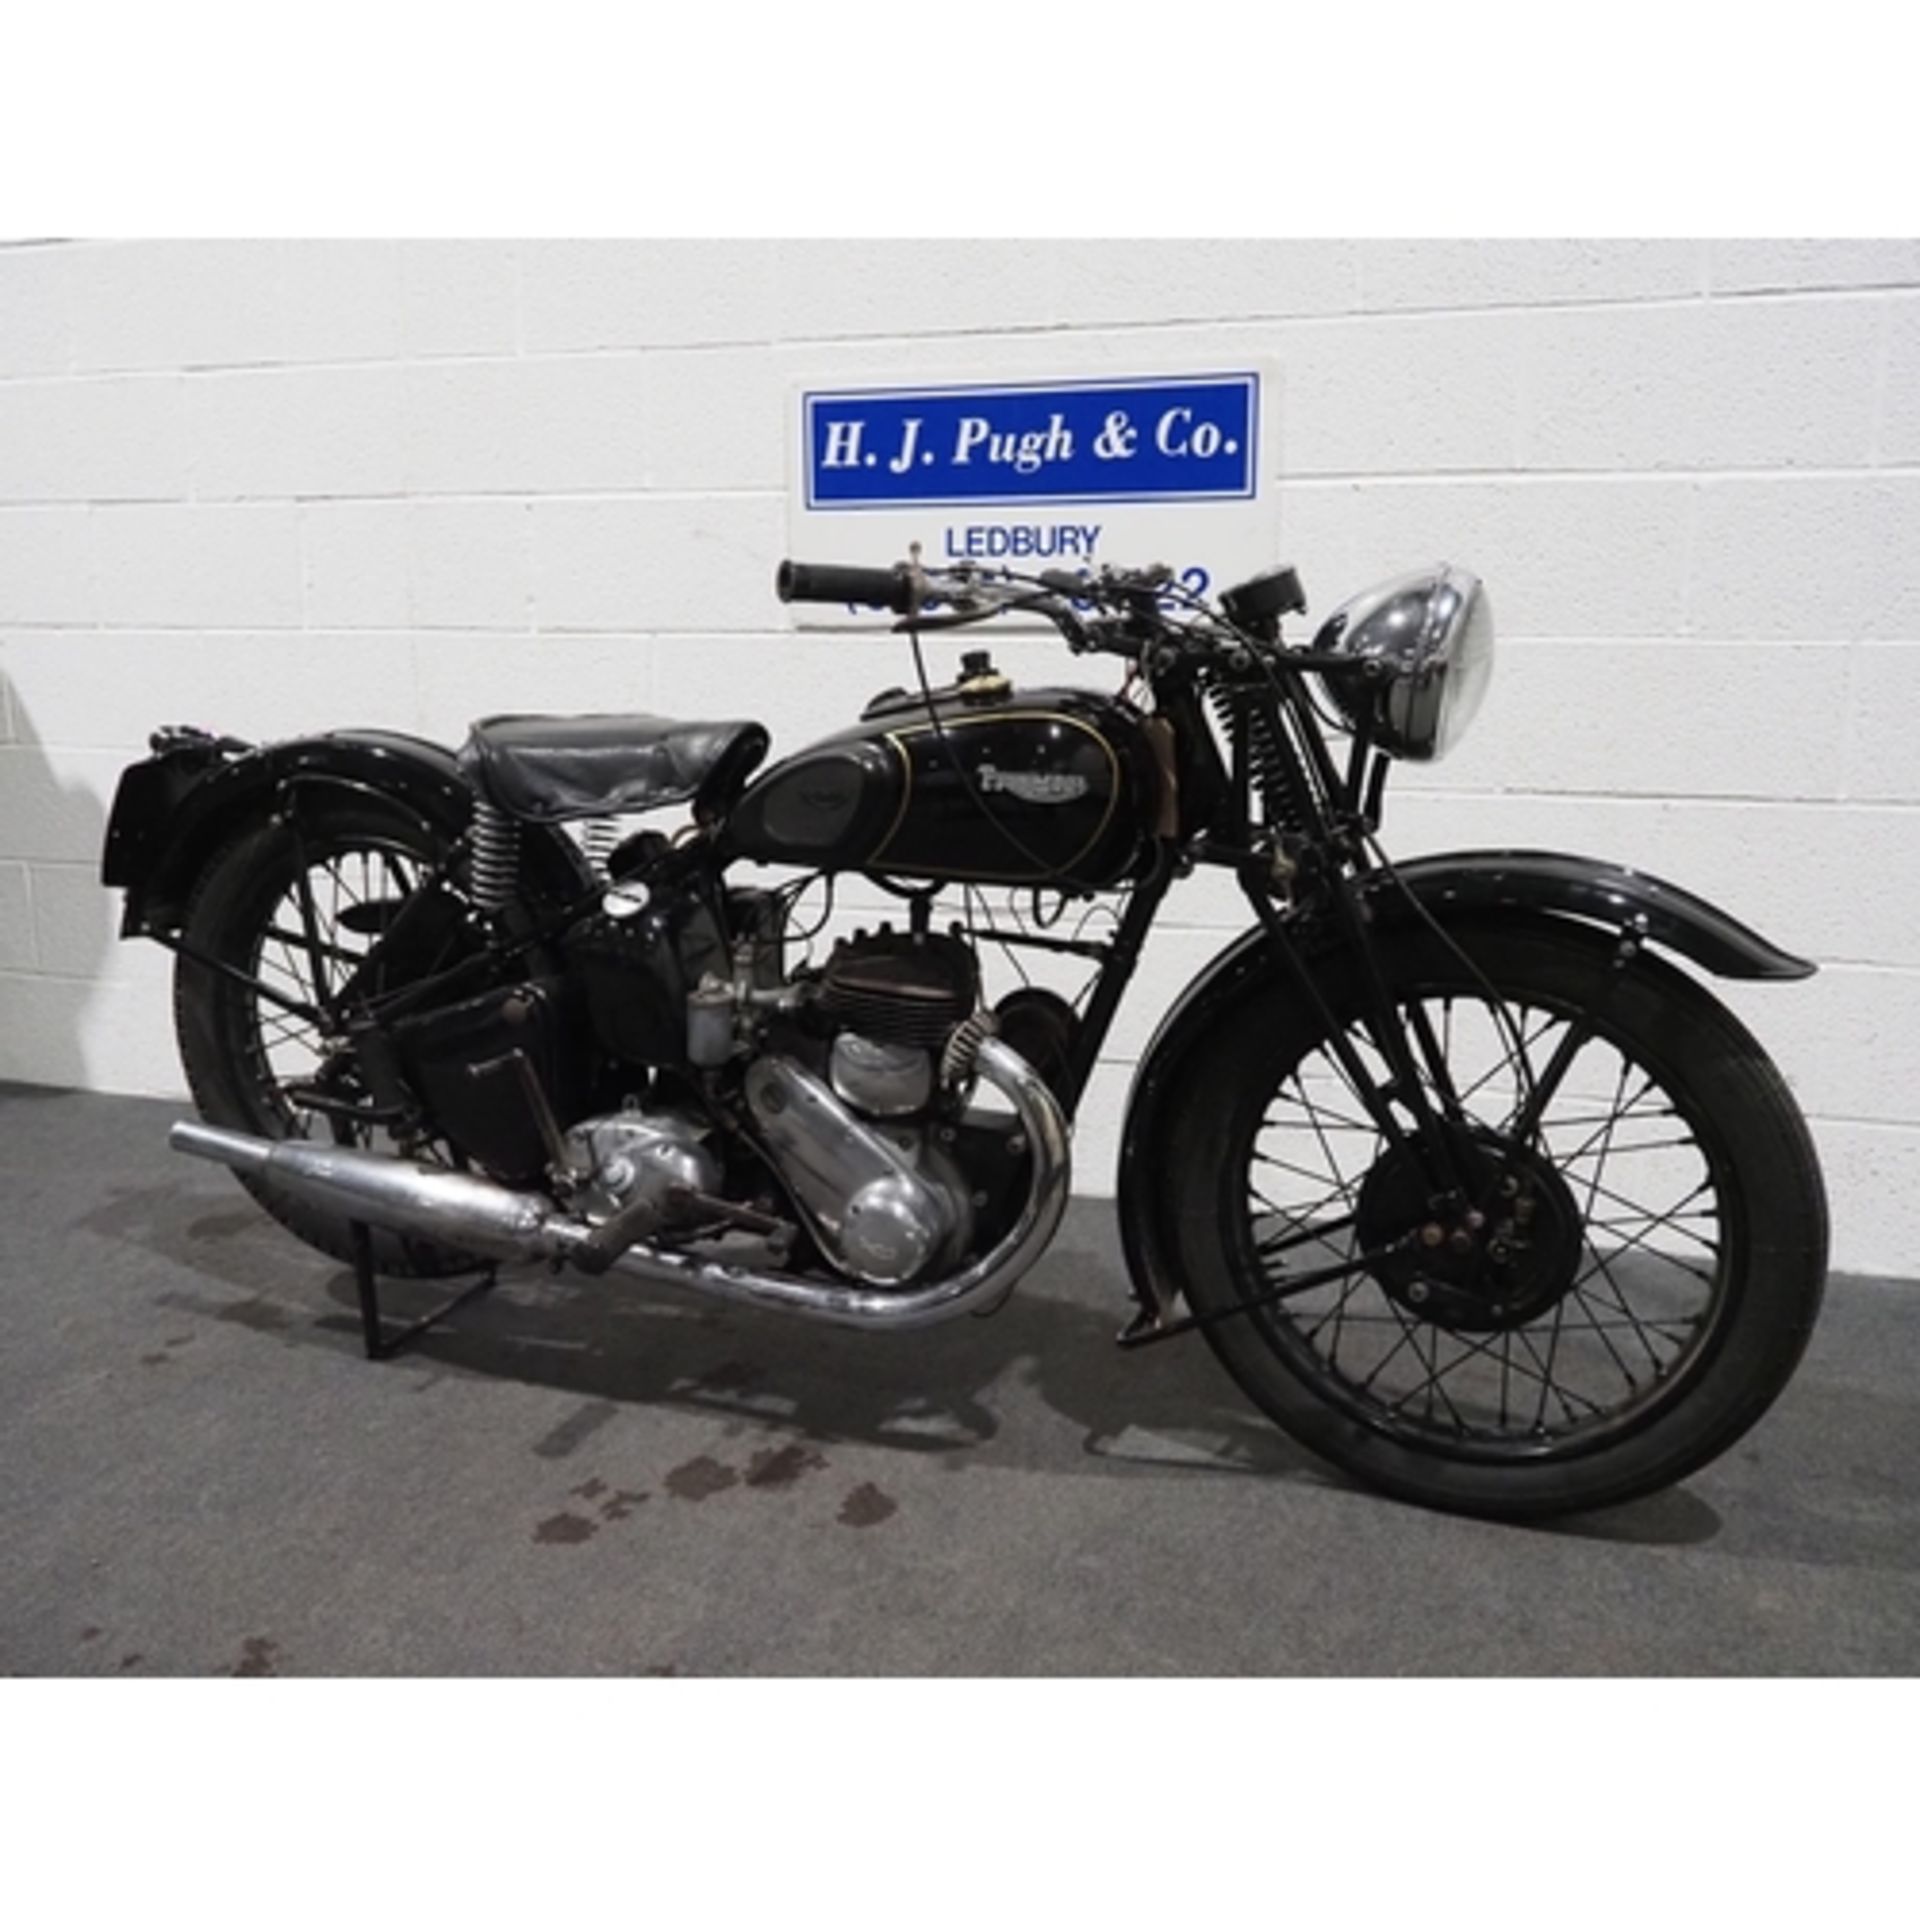 Triumph 3S motorcycle. 350cc. 1939 Frame No. TL9459 Engine No. 93S19001 Runs and rides well. C/w